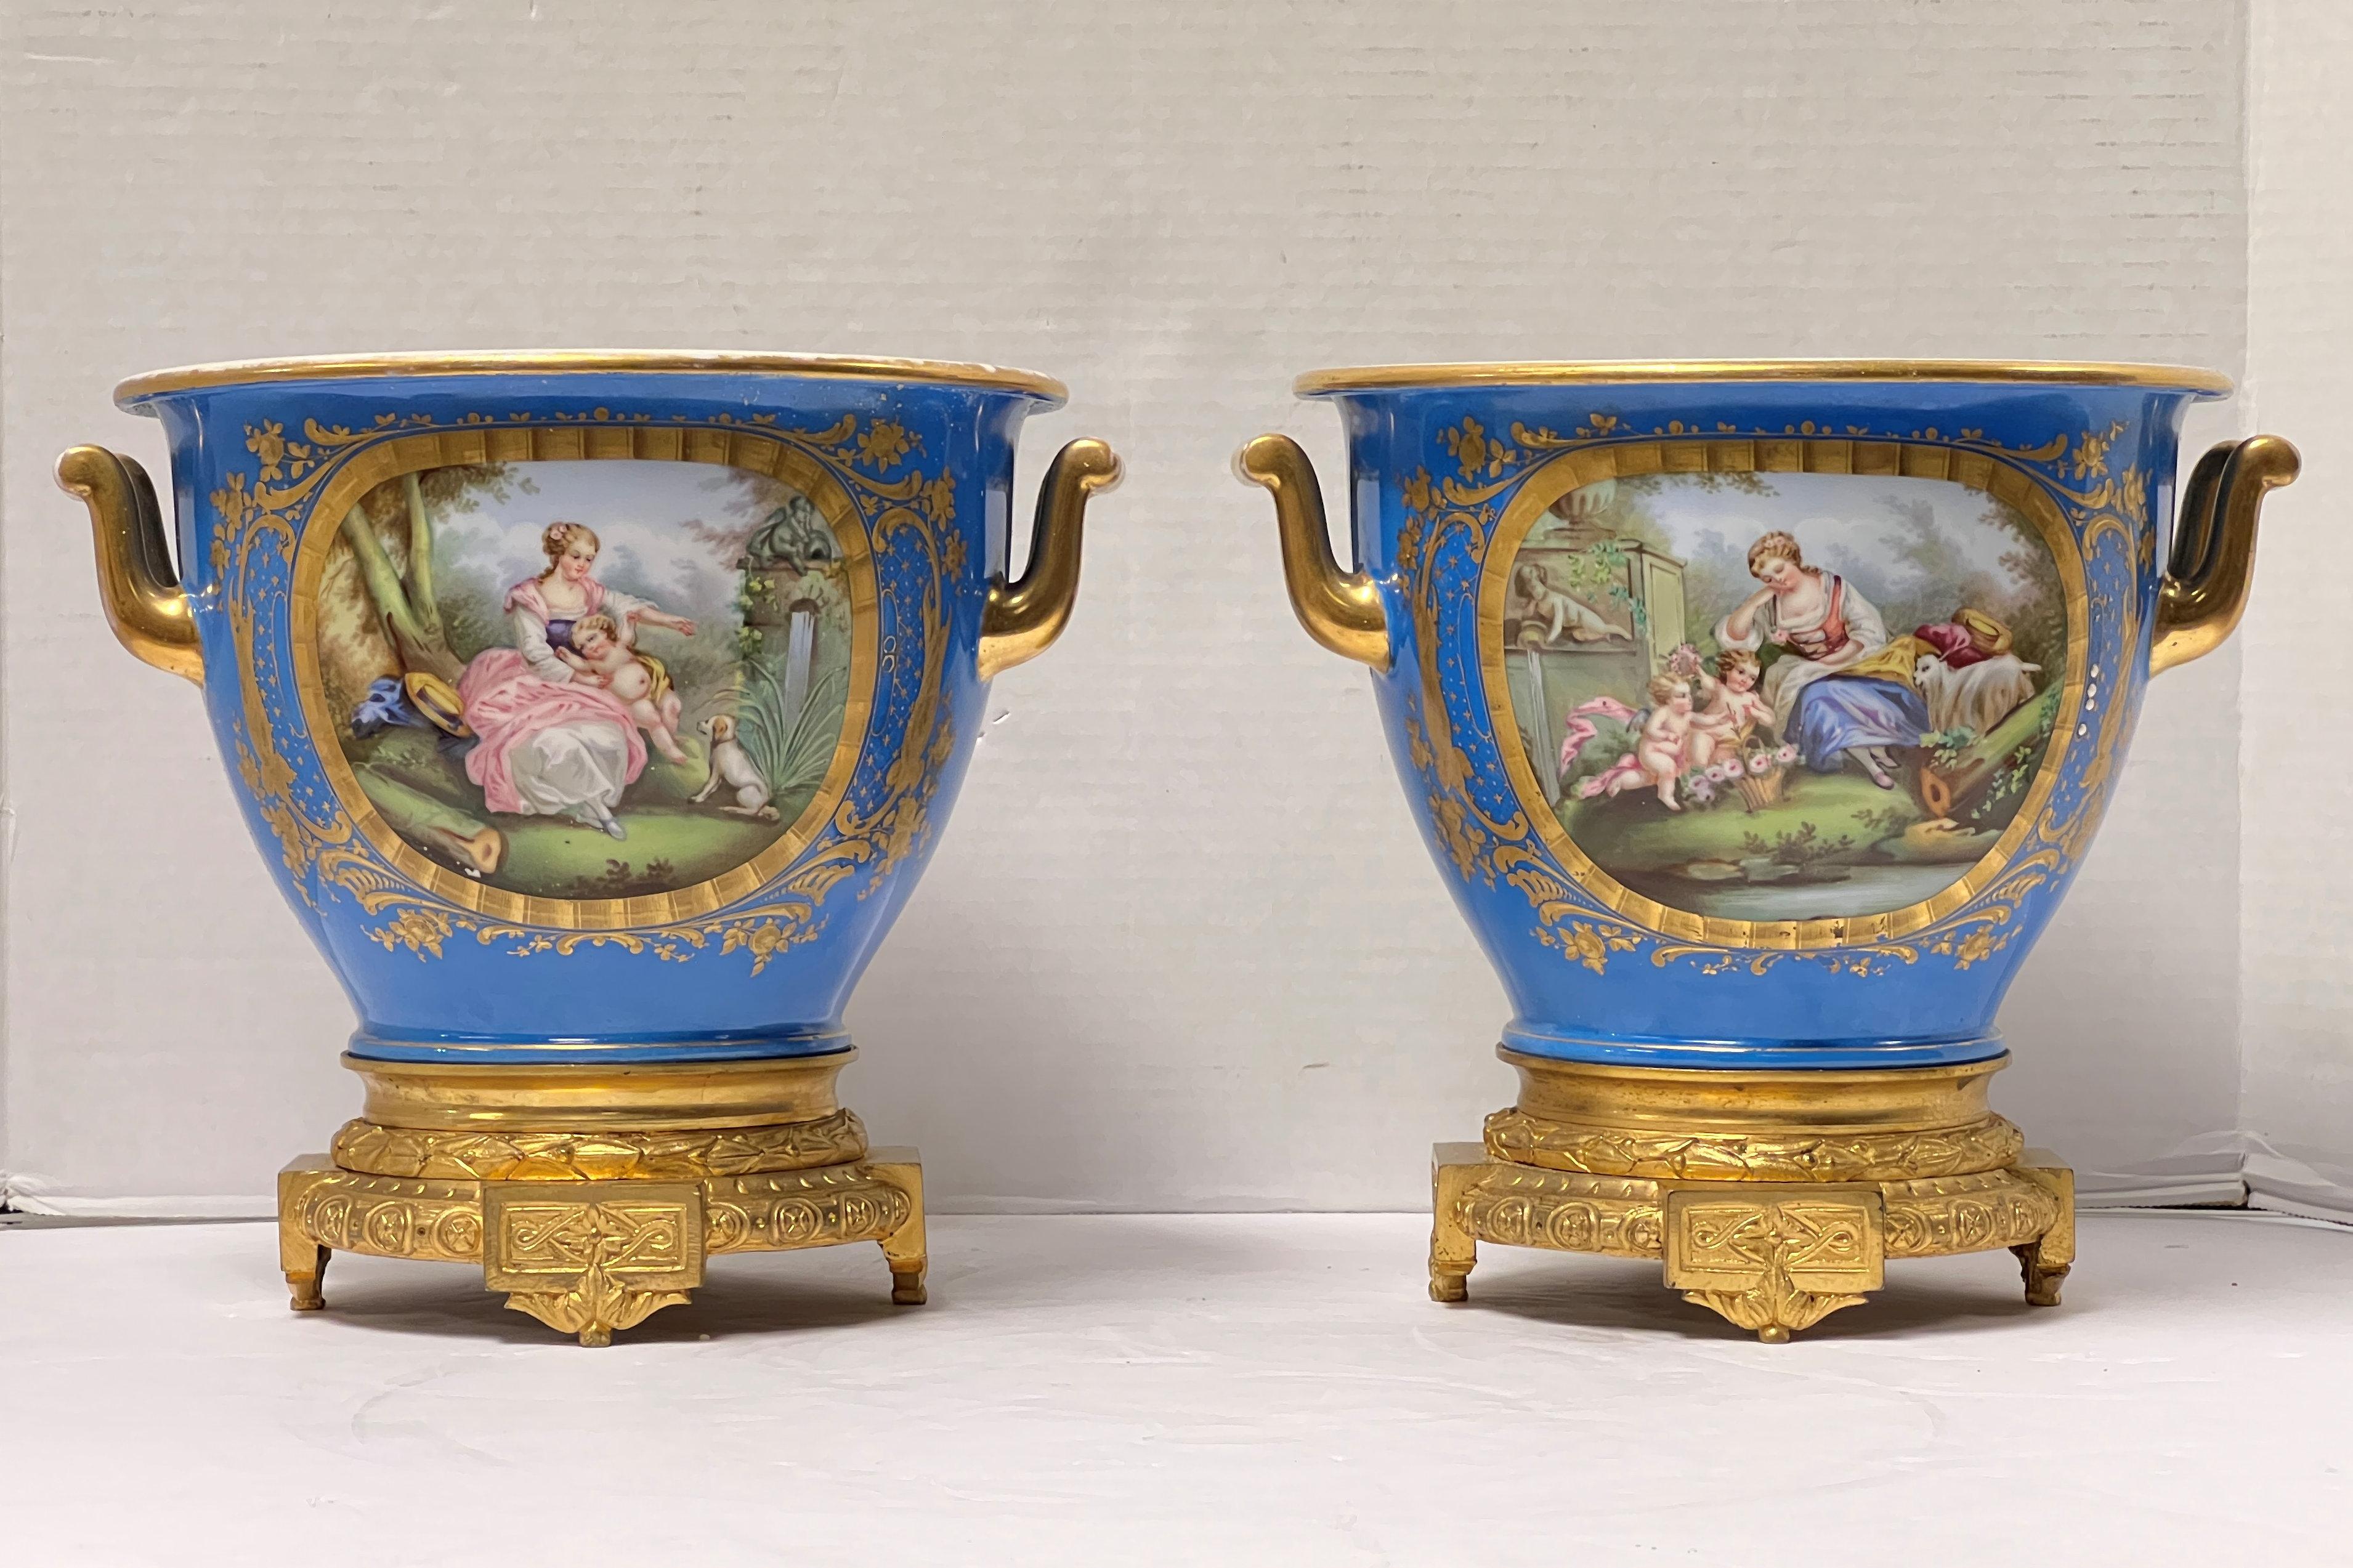 Pair of very fine quality French 19 century Gilt Bronze mounted Celest blue Serves porcelain cachepots.